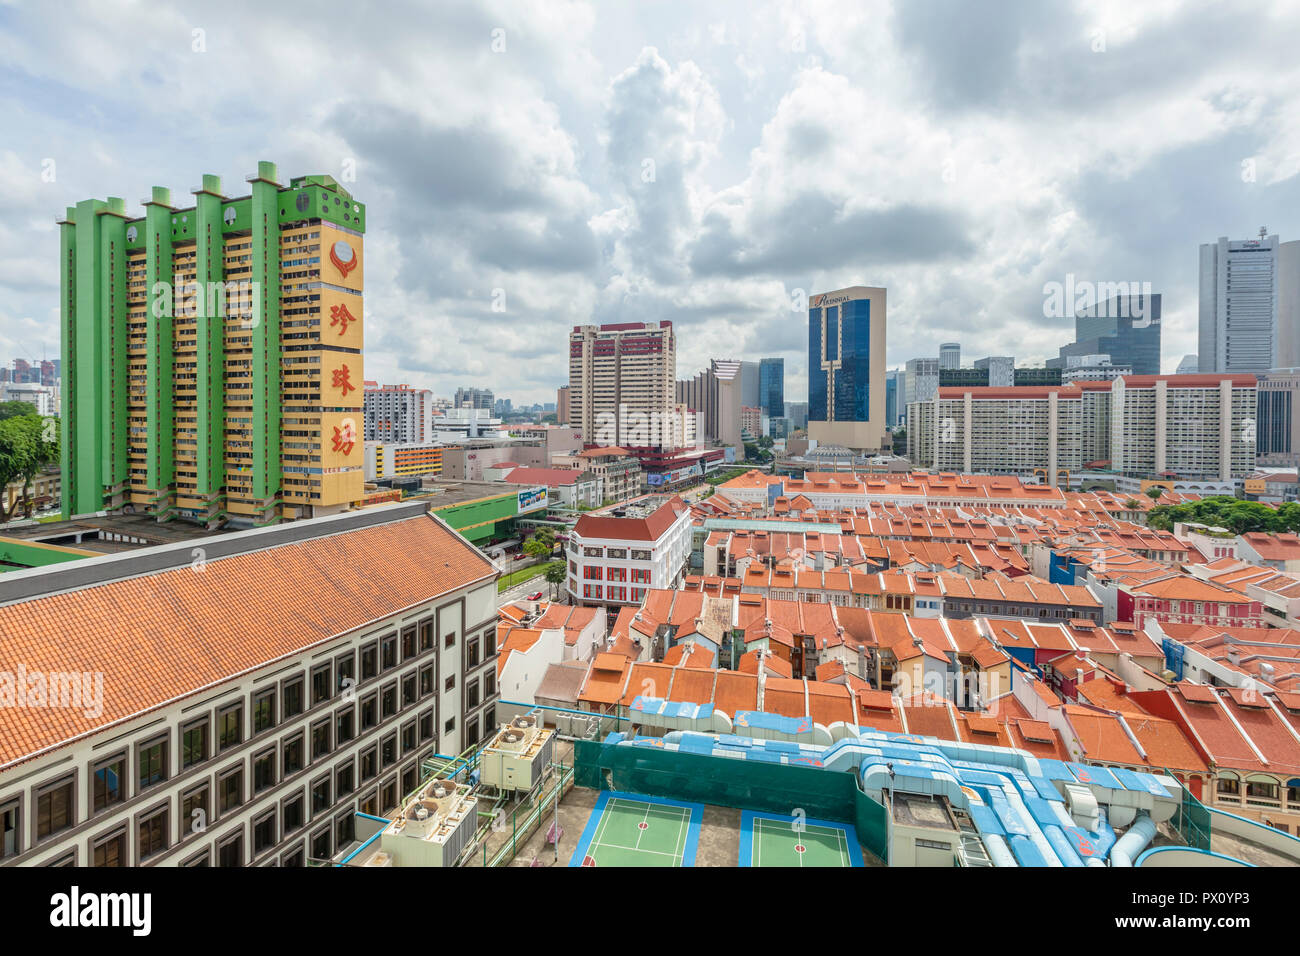 People's Park Complex and the surrounding conserved shophouses in Chinatown, Singapore Stock Photo